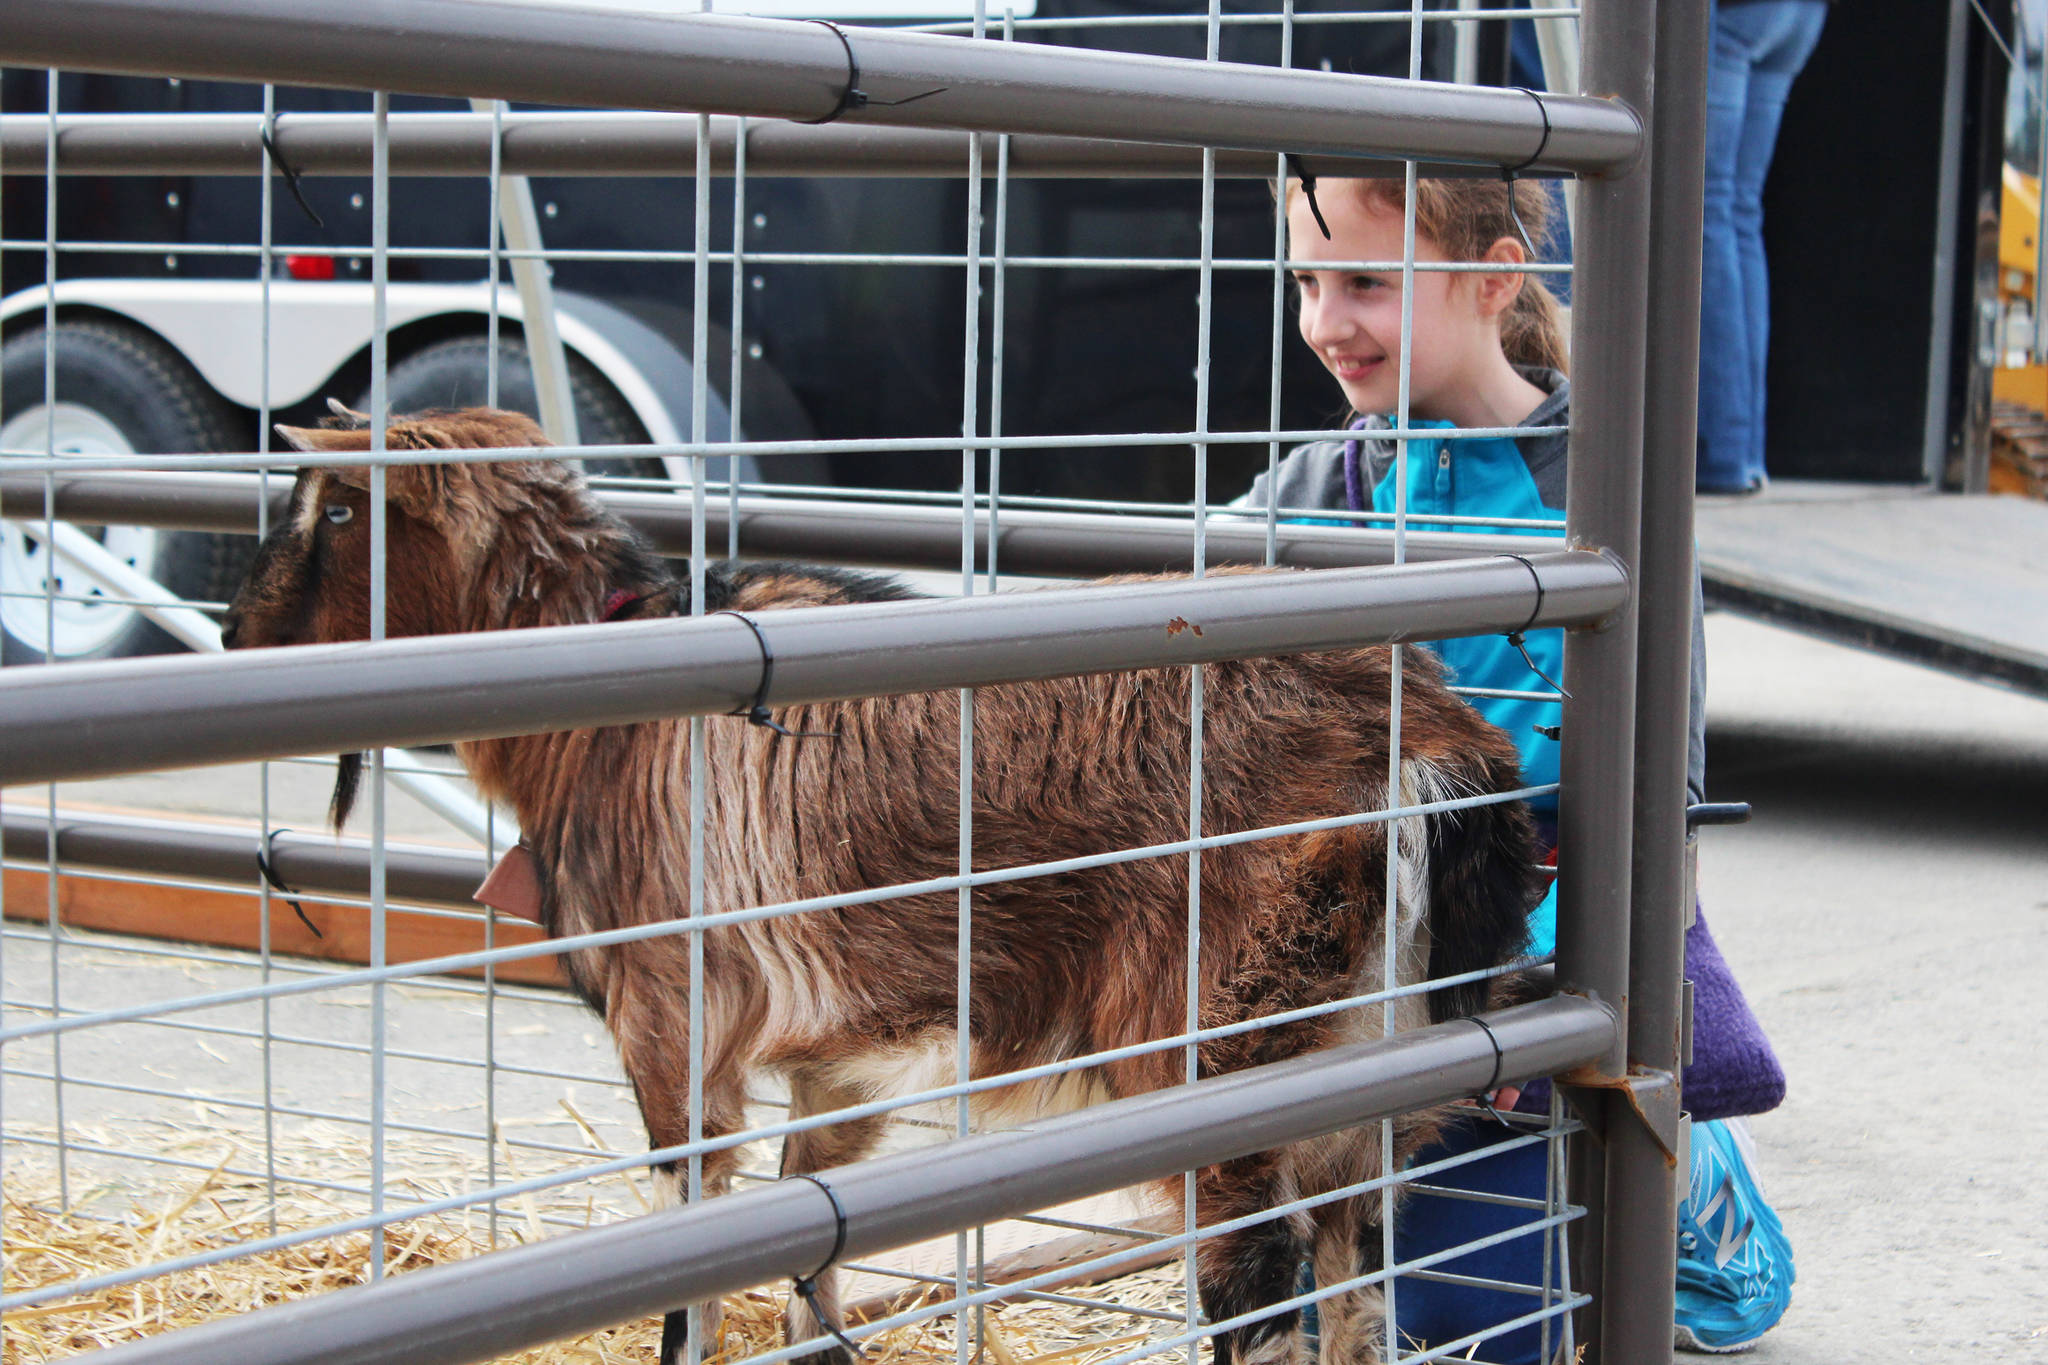 Sarah Jane Baisden, 9, of Nikiski, admires a goat from the Funny River Farm on Saturday, April 8, 2017 outside the Annual Home Show at the Soldotna Regional Sports Center in Soldotna, Alaska.